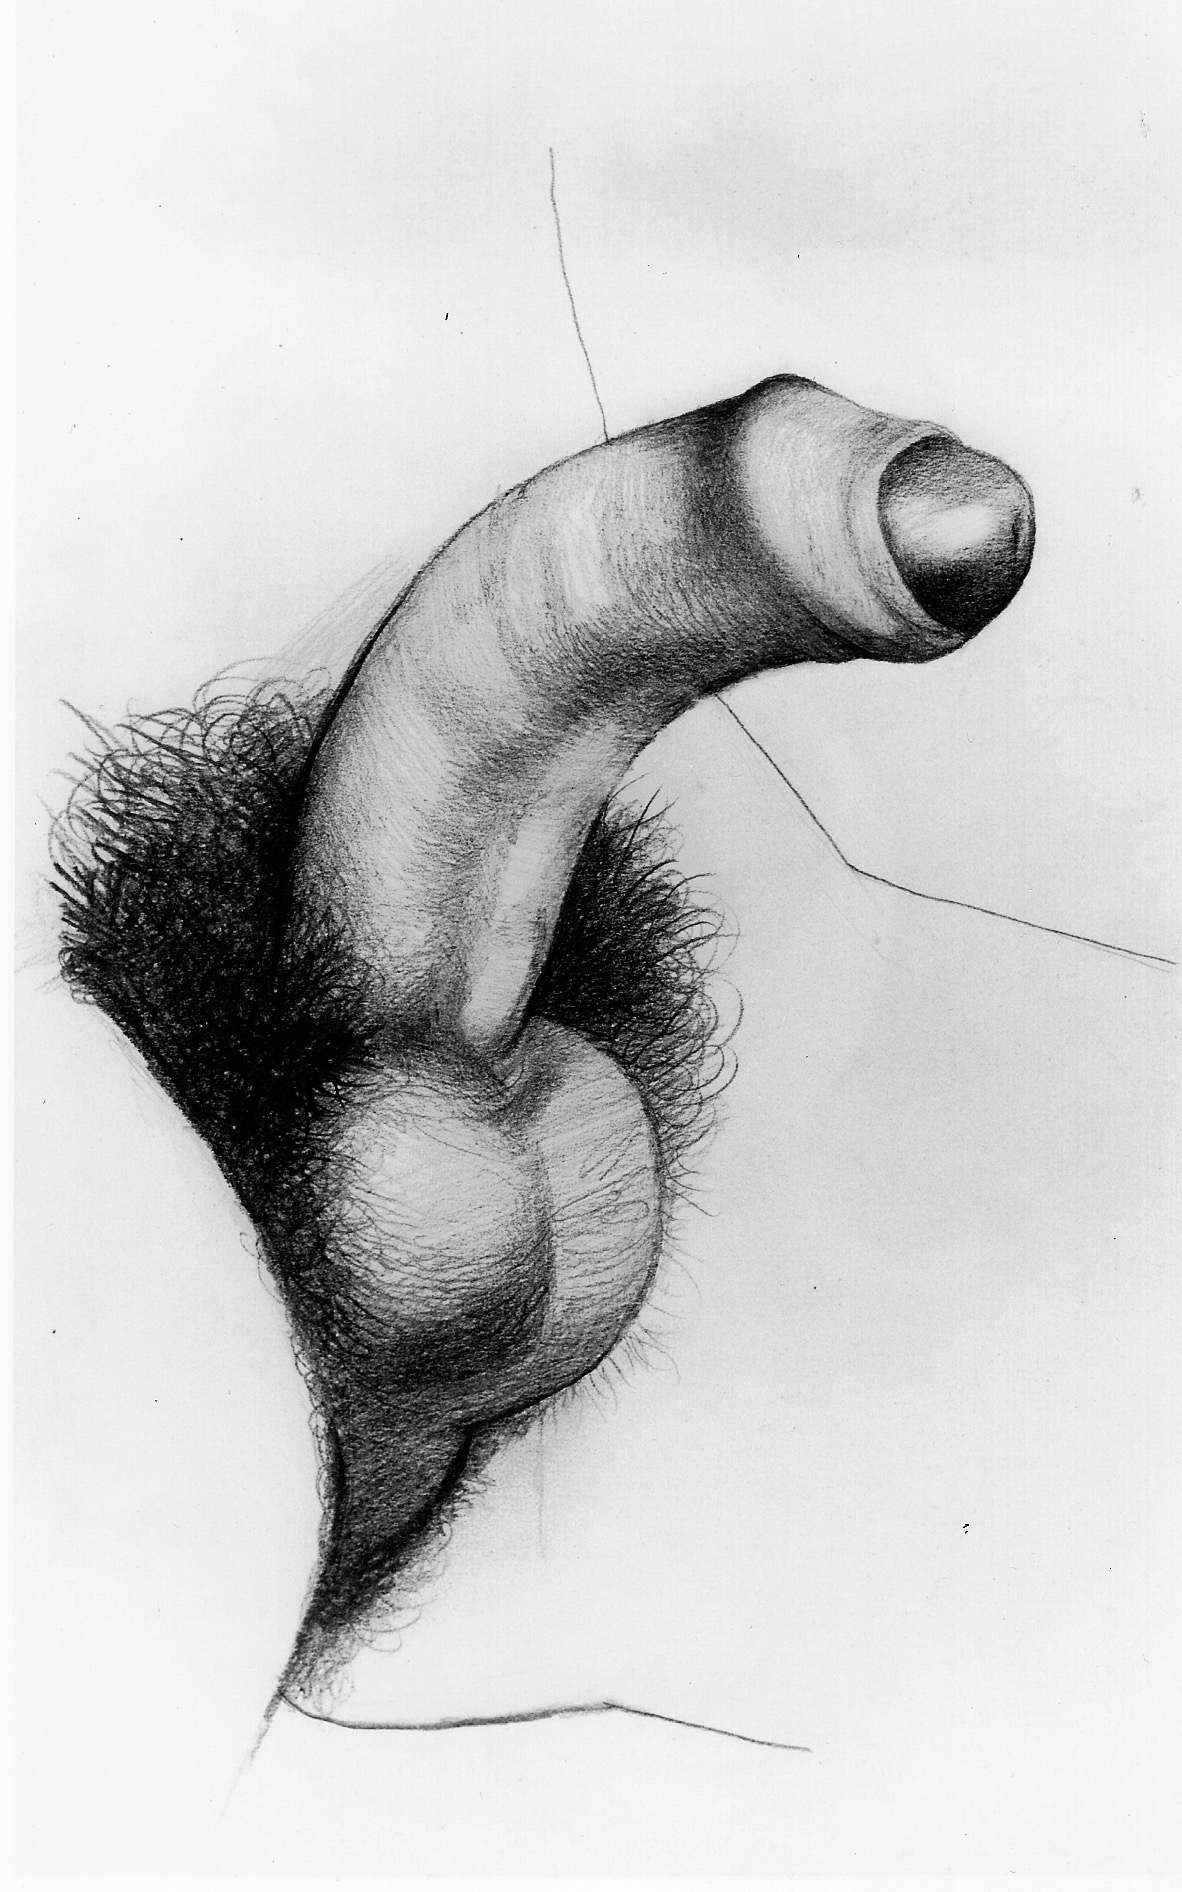 This is what happens when you ask a bunch of gay men to draw vaginas